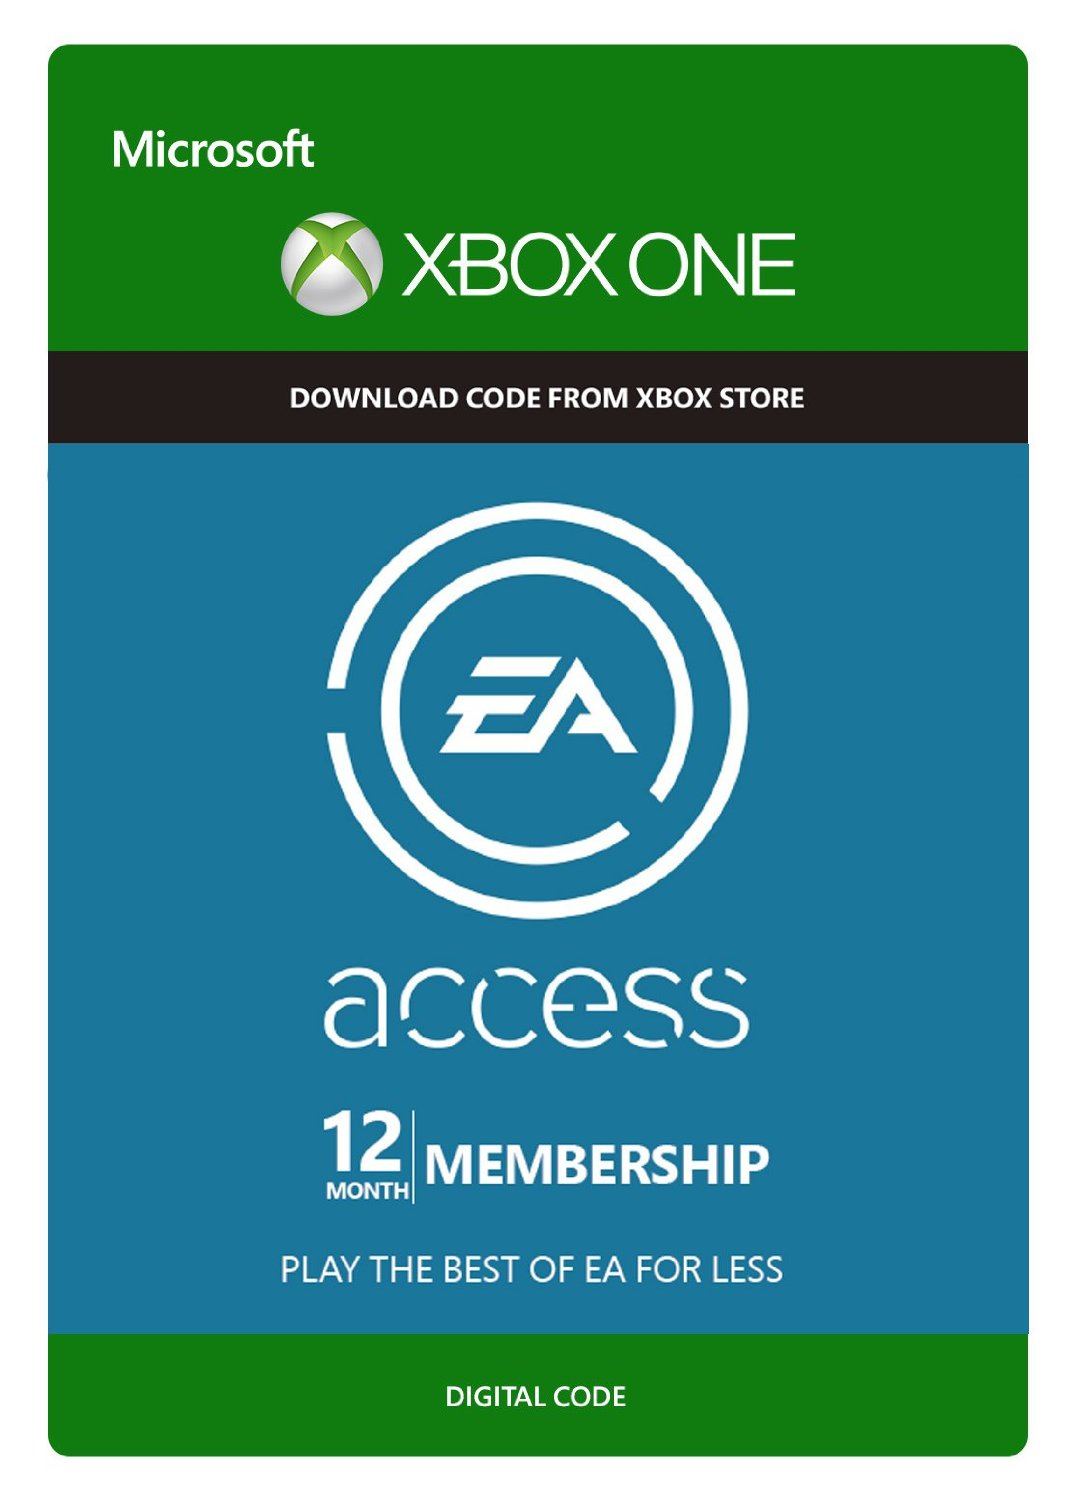 xbox game pass ultimate 12 month free